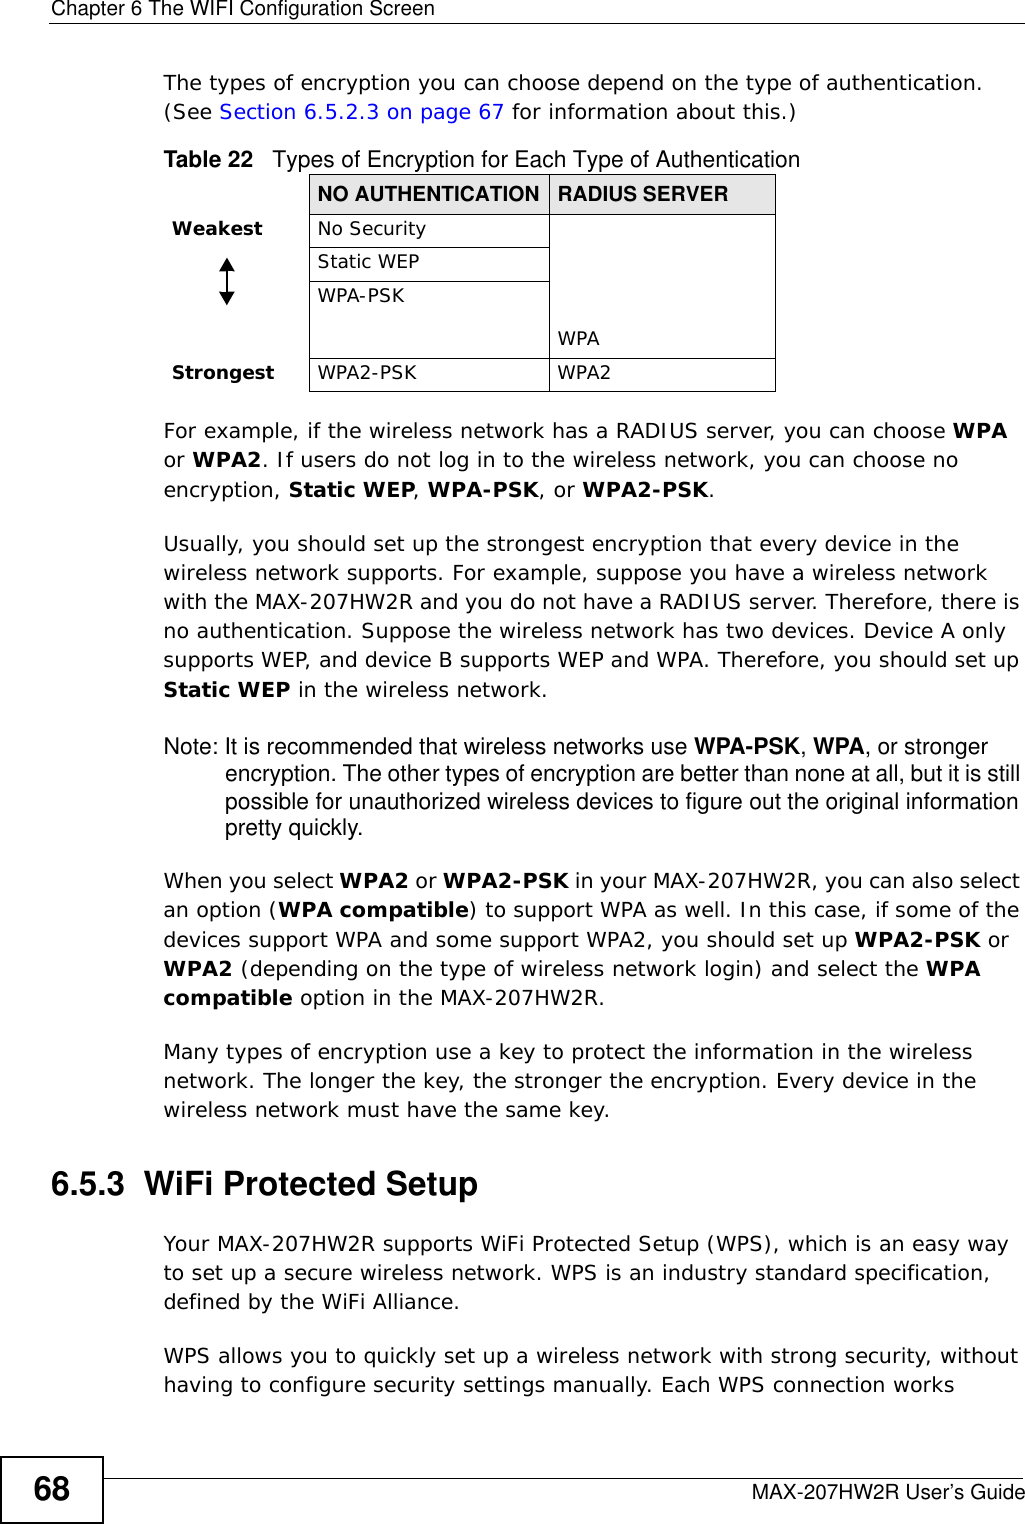 Chapter 6 The WIFI Configuration ScreenMAX-207HW2R User’s Guide68The types of encryption you can choose depend on the type of authentication. (See Section 6.5.2.3 on page 67 for information about this.)For example, if the wireless network has a RADIUS server, you can choose WPA or WPA2. If users do not log in to the wireless network, you can choose no encryption, Static WEP, WPA-PSK, or WPA2-PSK.Usually, you should set up the strongest encryption that every device in the wireless network supports. For example, suppose you have a wireless network with the MAX-207HW2R and you do not have a RADIUS server. Therefore, there is no authentication. Suppose the wireless network has two devices. Device A only supports WEP, and device B supports WEP and WPA. Therefore, you should set up Static WEP in the wireless network.Note: It is recommended that wireless networks use WPA-PSK, WPA, or stronger encryption. The other types of encryption are better than none at all, but it is still possible for unauthorized wireless devices to figure out the original information pretty quickly.When you select WPA2 or WPA2-PSK in your MAX-207HW2R, you can also select an option (WPA compatible) to support WPA as well. In this case, if some of the devices support WPA and some support WPA2, you should set up WPA2-PSK or WPA2 (depending on the type of wireless network login) and select the WPA compatible option in the MAX-207HW2R.Many types of encryption use a key to protect the information in the wireless network. The longer the key, the stronger the encryption. Every device in the wireless network must have the same key.6.5.3  WiFi Protected SetupYour MAX-207HW2R supports WiFi Protected Setup (WPS), which is an easy way to set up a secure wireless network. WPS is an industry standard specification, defined by the WiFi Alliance.WPS allows you to quickly set up a wireless network with strong security, without having to configure security settings manually. Each WPS connection works Table 22   Types of Encryption for Each Type of AuthenticationNO AUTHENTICATION RADIUS SERVERWeakest No SecurityWPAStatic WEPWPA-PSKStrongest WPA2-PSK WPA2